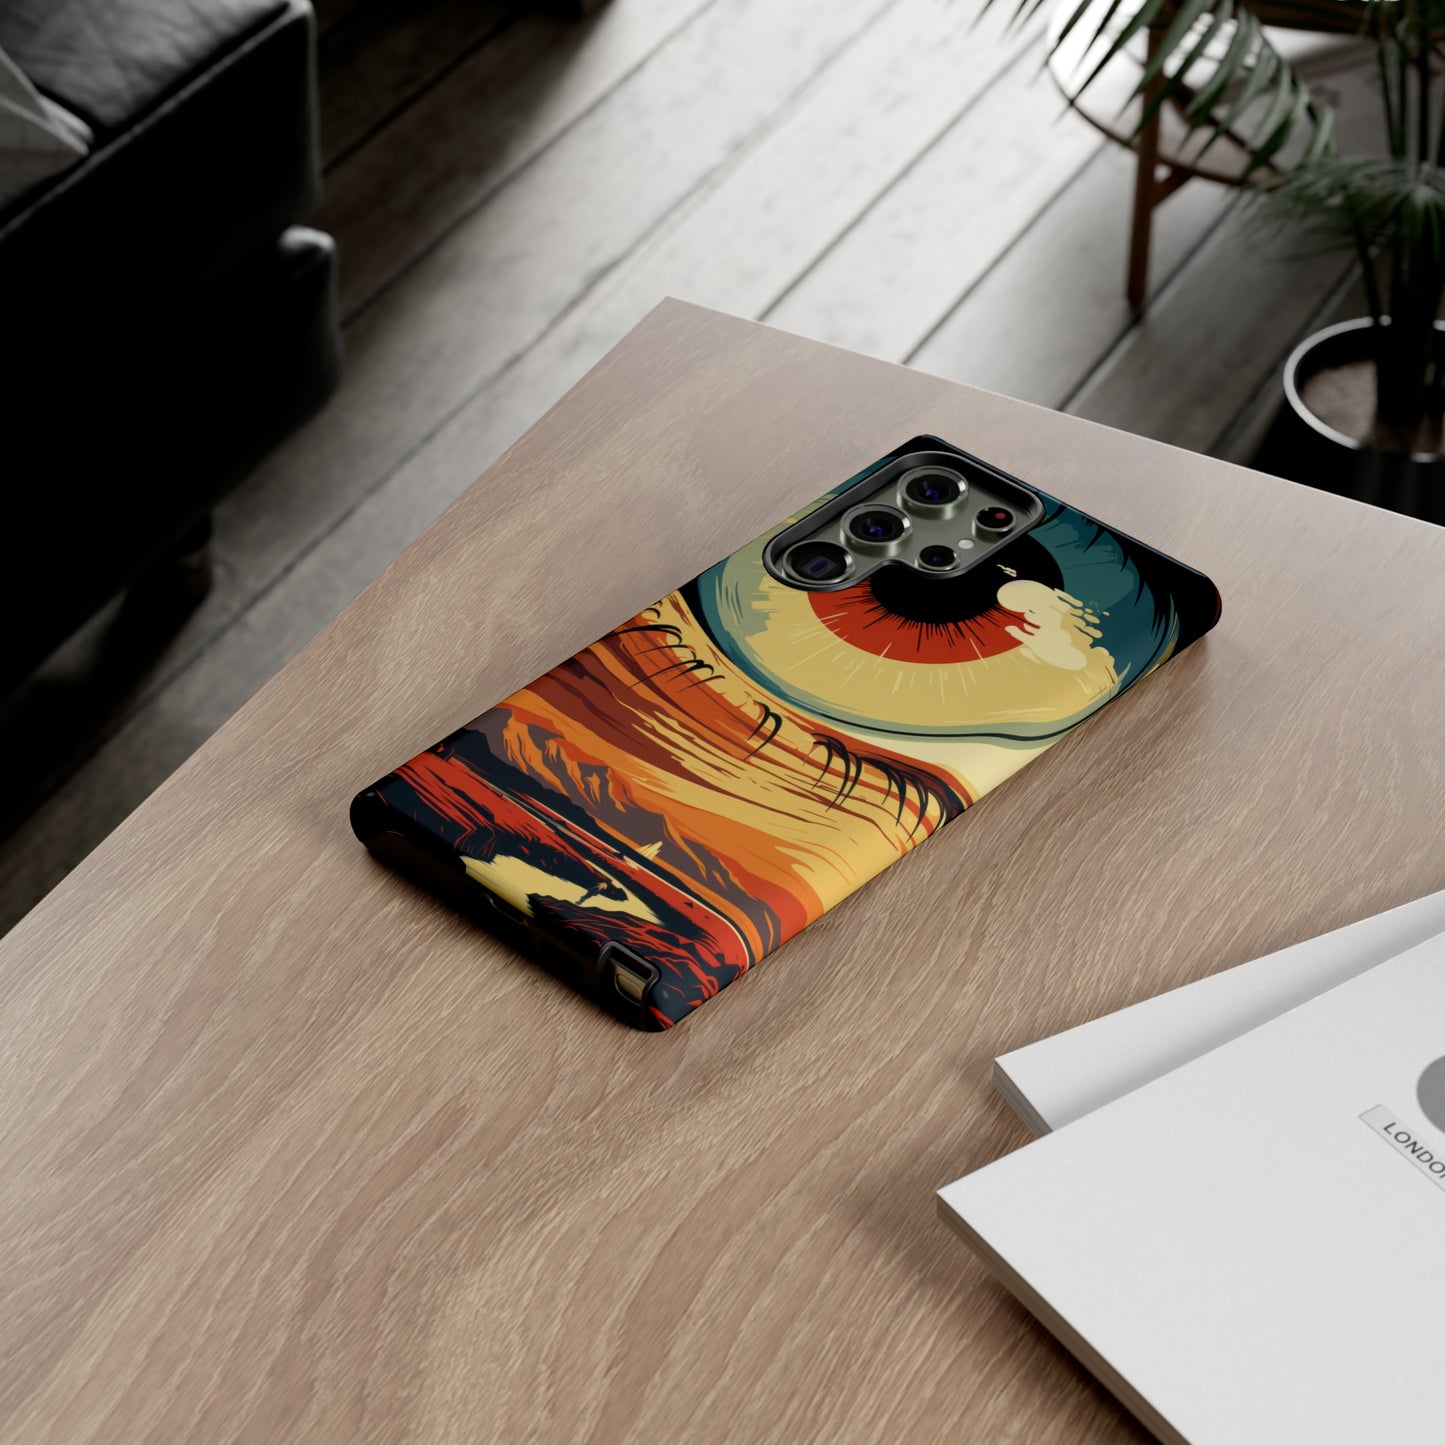 Nature's Beholder: Red Eye Gazing Intently Phone Case for iPhone, Samsung, Pixel